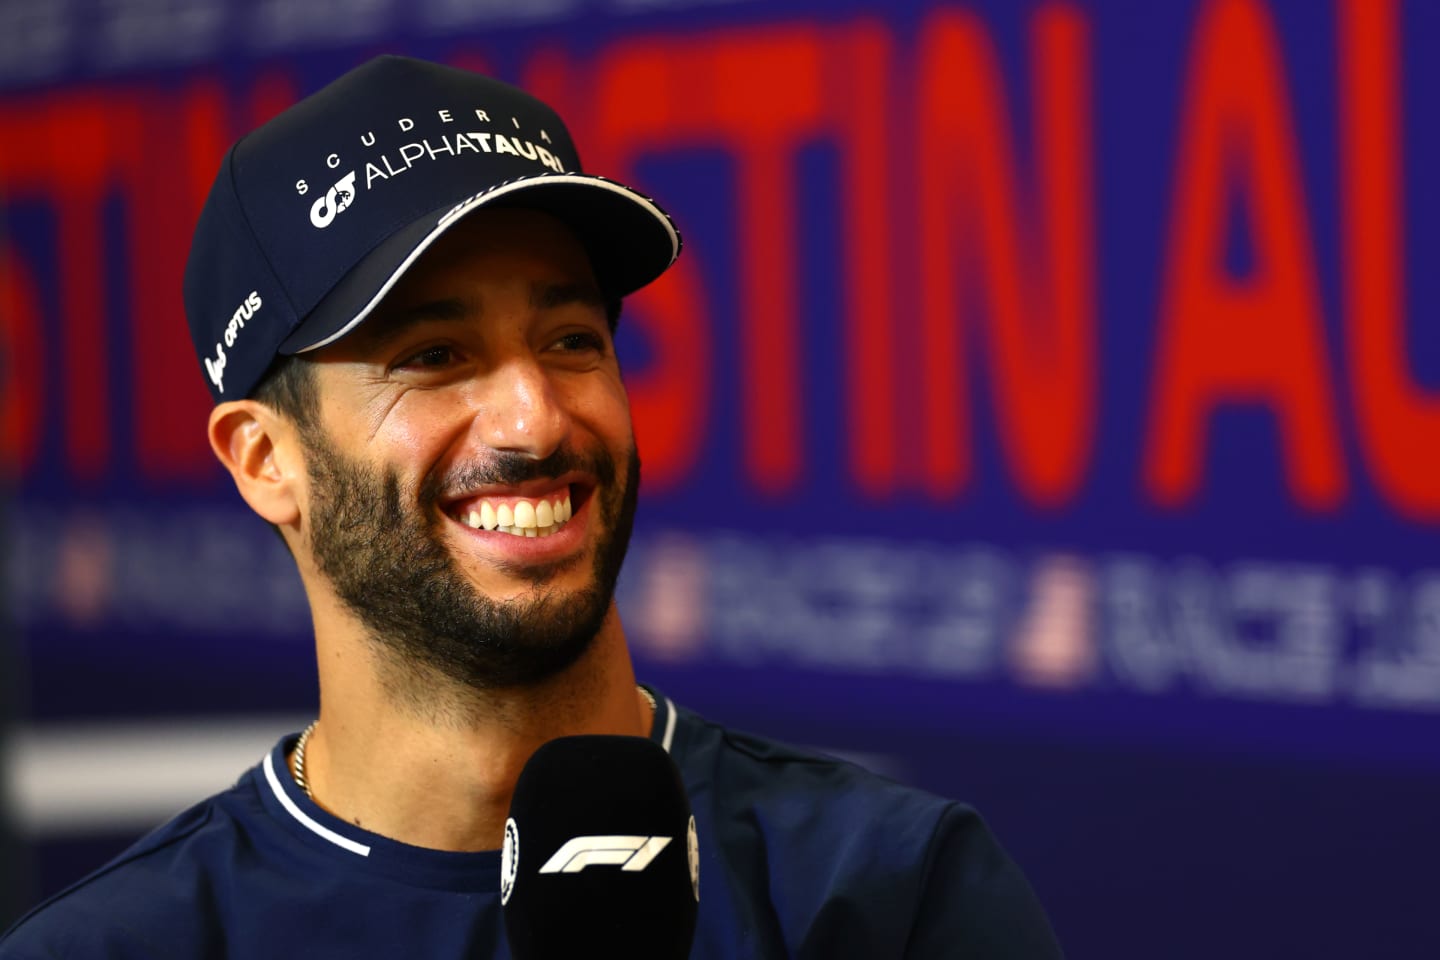 AUSTIN, TEXAS - OCTOBER 19: Daniel Ricciardo of Australia and Scuderia AlphaTauri attends the Drivers Press Conference during previews ahead of the F1 Grand Prix of United States at Circuit of The Americas on October 19, 2023 in Austin, Texas. (Photo by Dan Istitene/Getty Images)